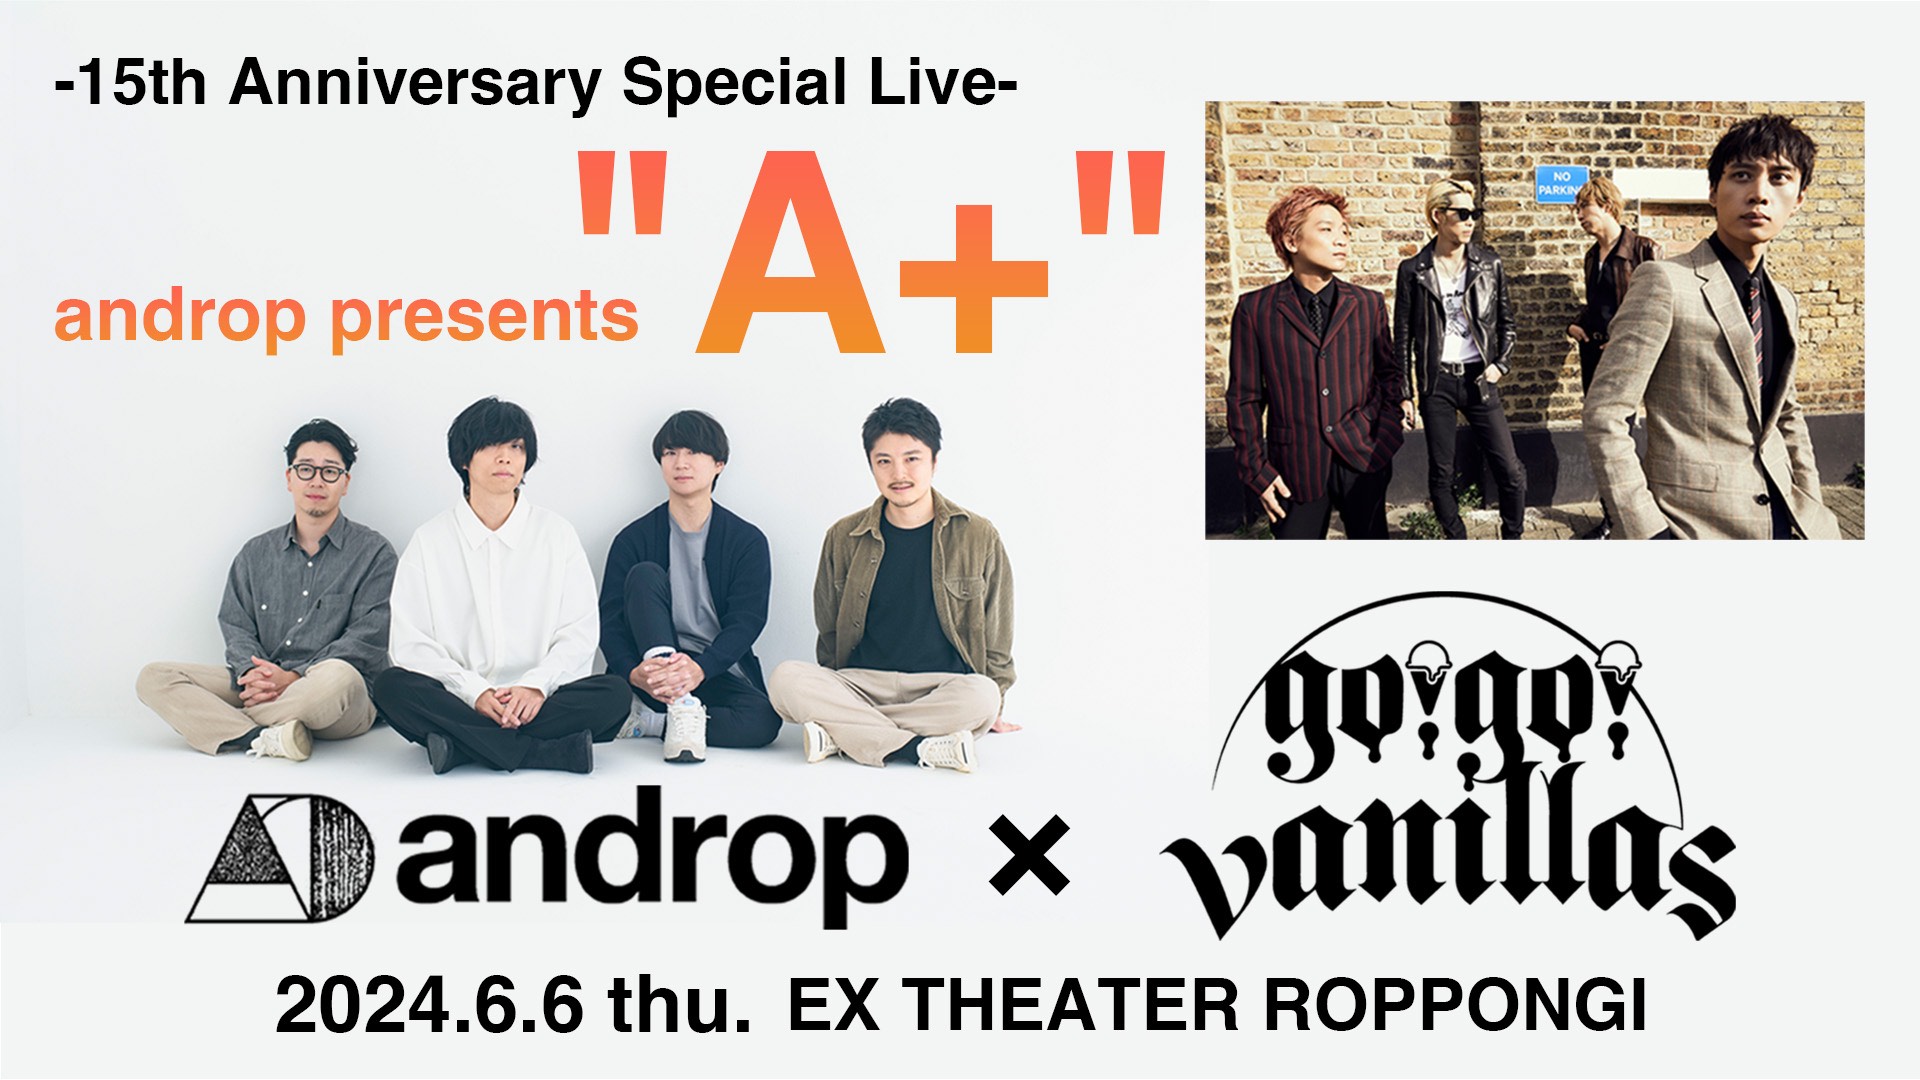 EX THEATER ROPPONGI<span class="live-title">15th Anniversary Special Live-  androp presents  "A+"「androp ✕ go!go!vanillas」</span>